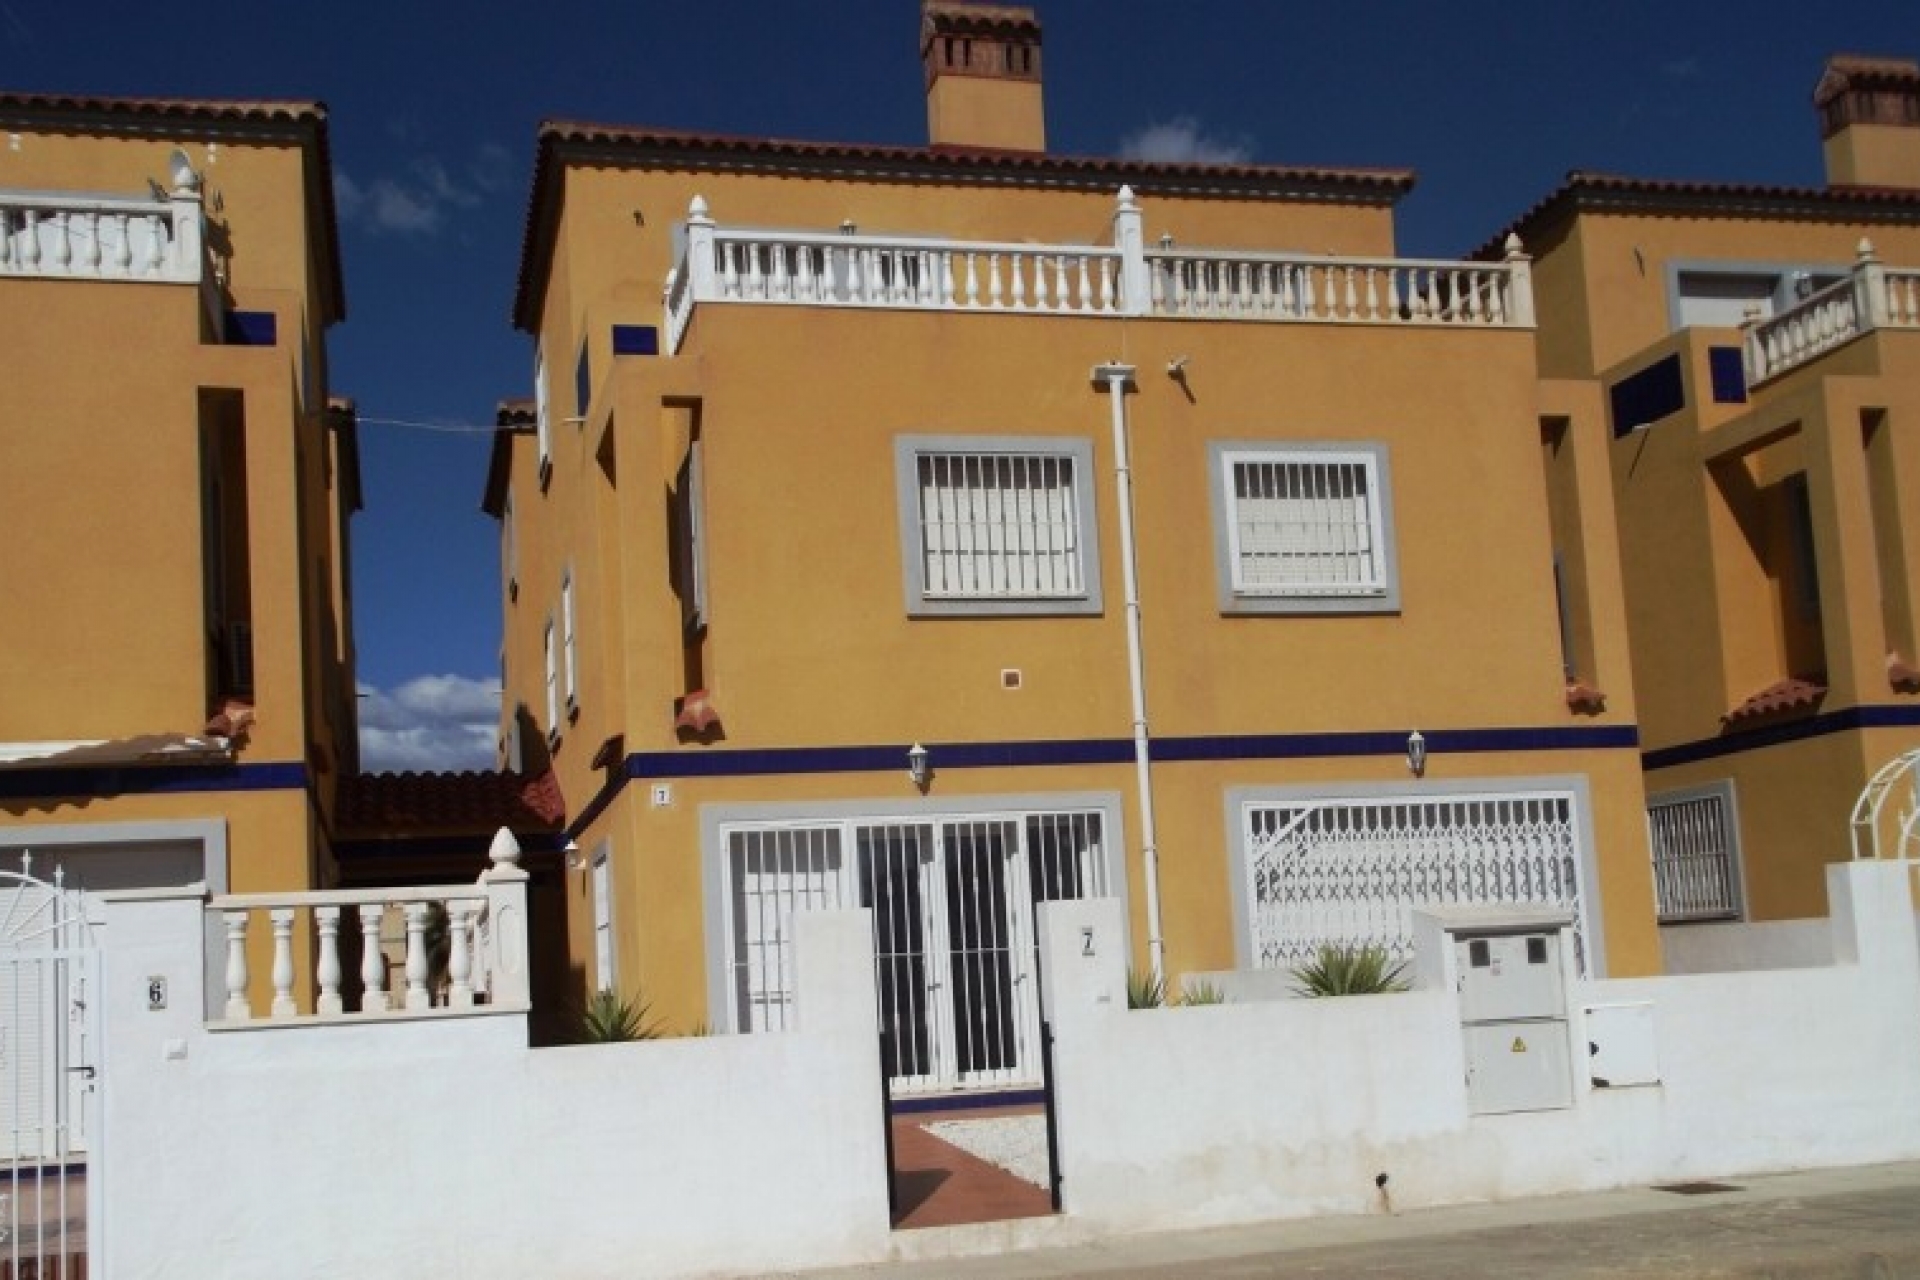 Close to Los Dolse and Playa Flamenca on Spains Orihuela Costa, cheap, bargain property for sale in La Zenia